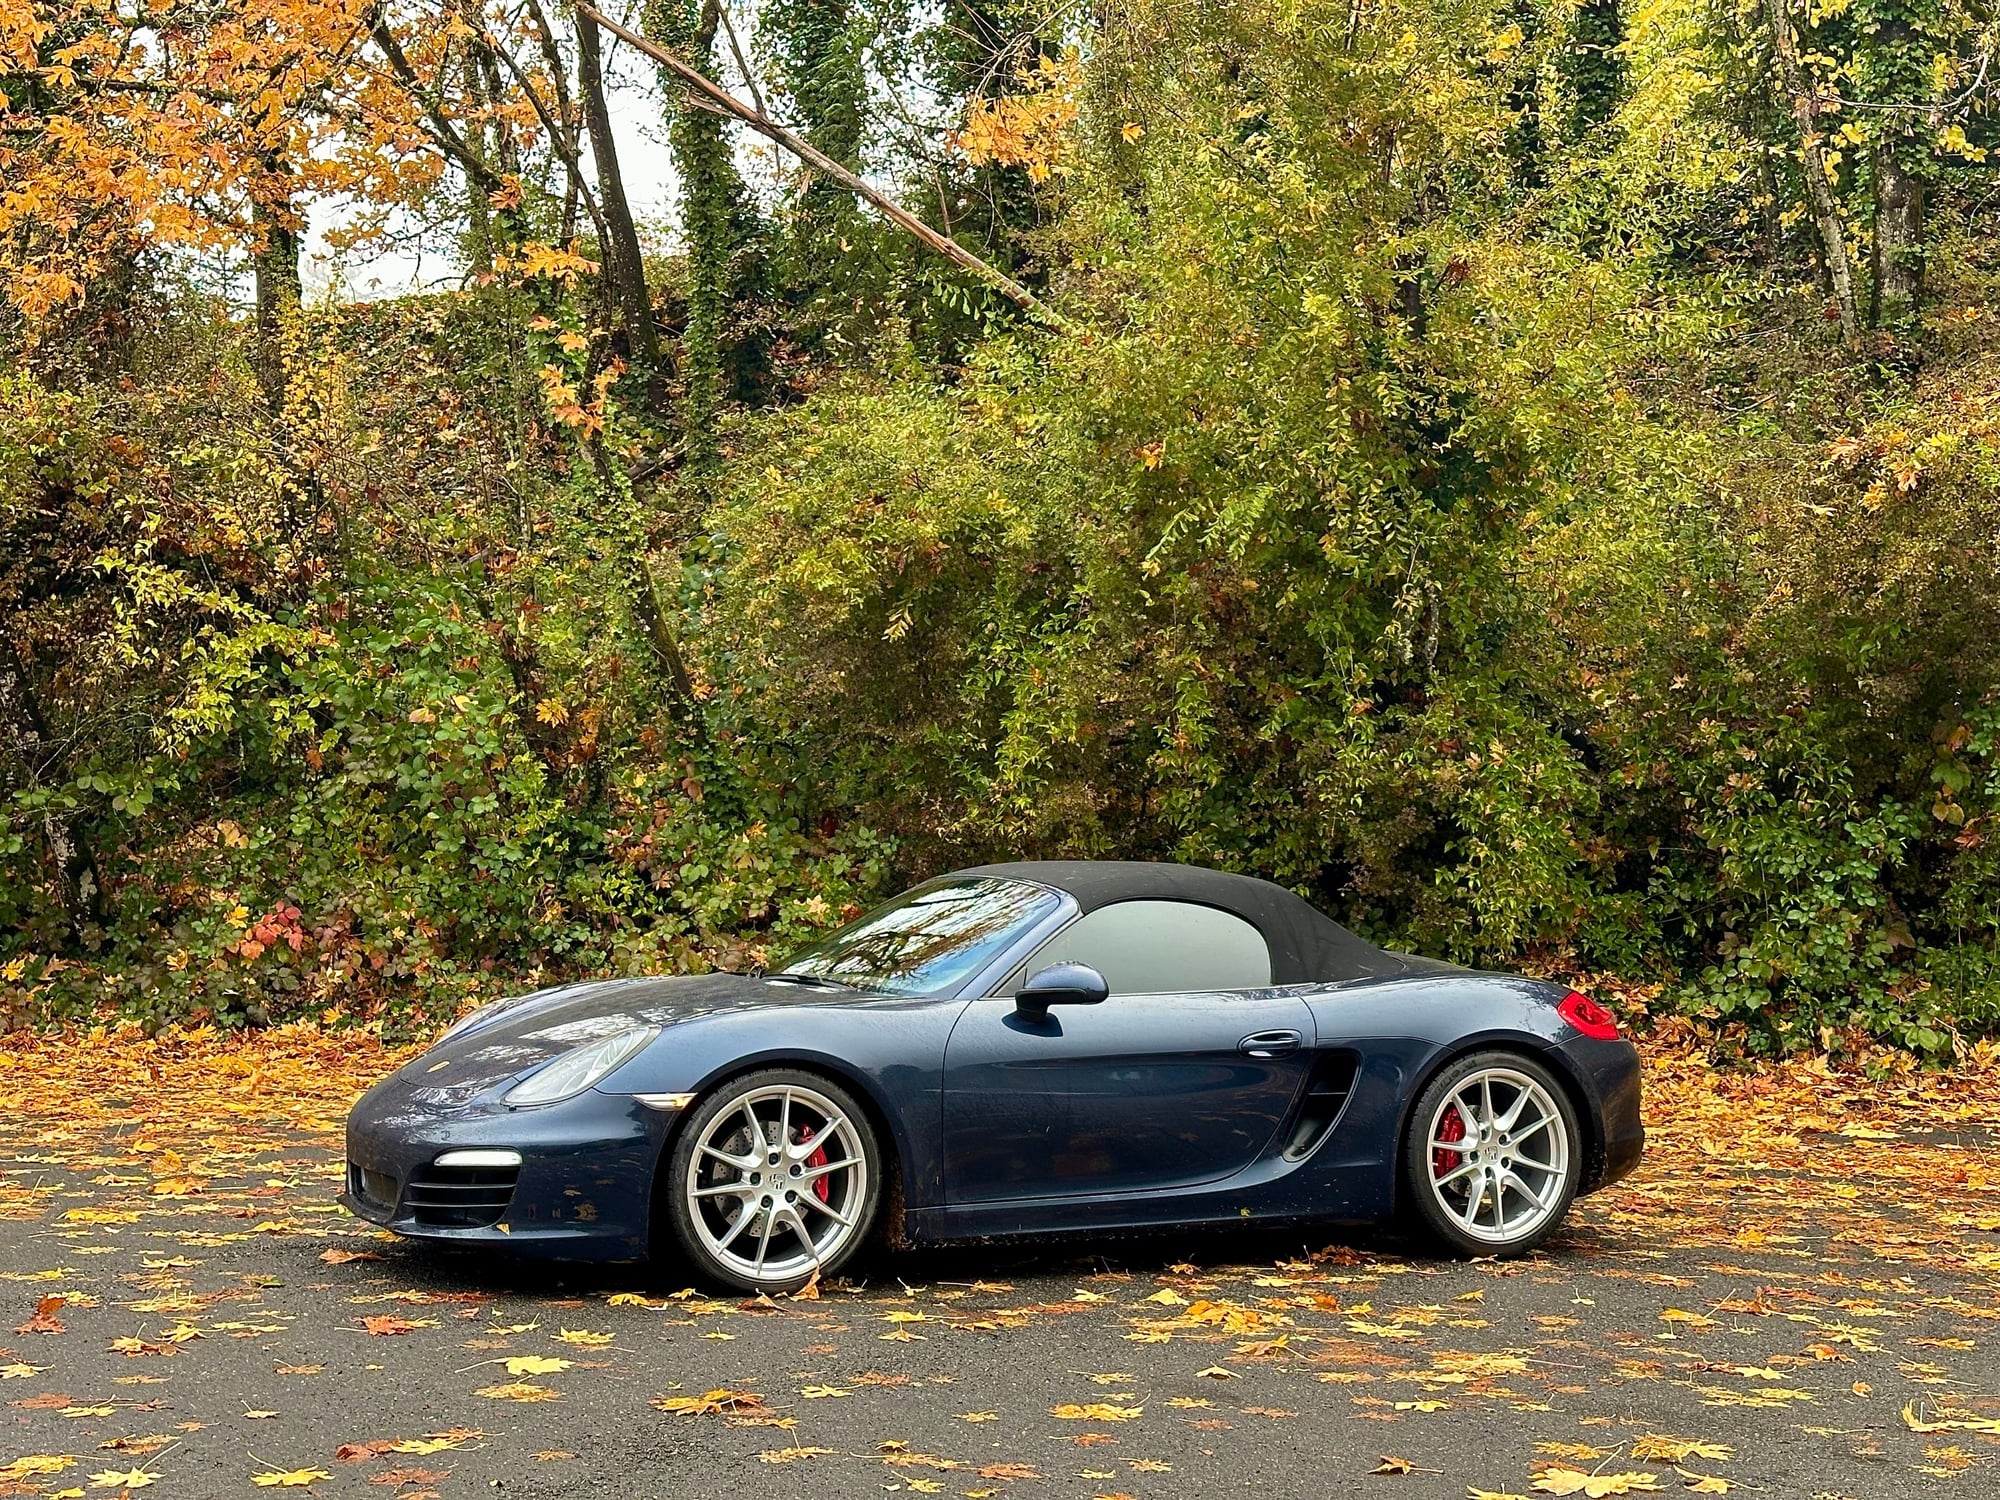 2014 Porsche Boxster - 2014 Boxster S - 42,500 miles, 6sp, GTS Spec + extra wheel set - Used - VIN WP0CB2A88ES141479 - 42,525 Miles - 6 cyl - 2WD - Manual - Convertible - Blue - Beaverton, OR 97005, United States